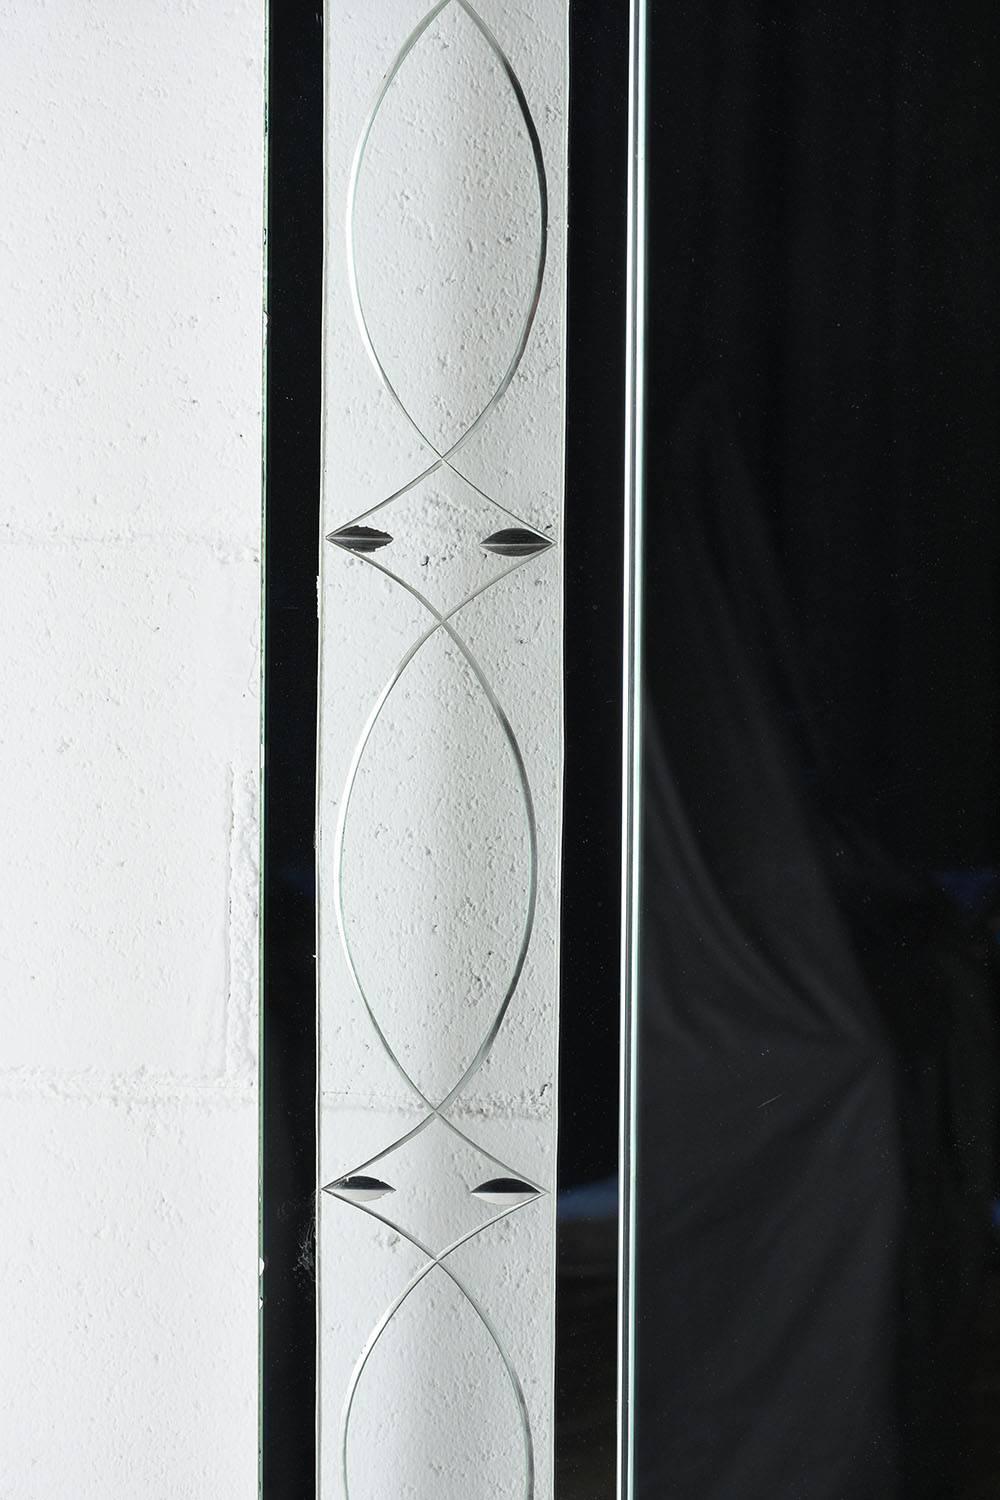 This 1960s Modern-style rectangular wall mirror features a glass and chrome frame. The frame has a chrome outer frame with raised corner accents and glass panel. The glass panels have decorative etches of diamonds and ovals. The main mirror is in